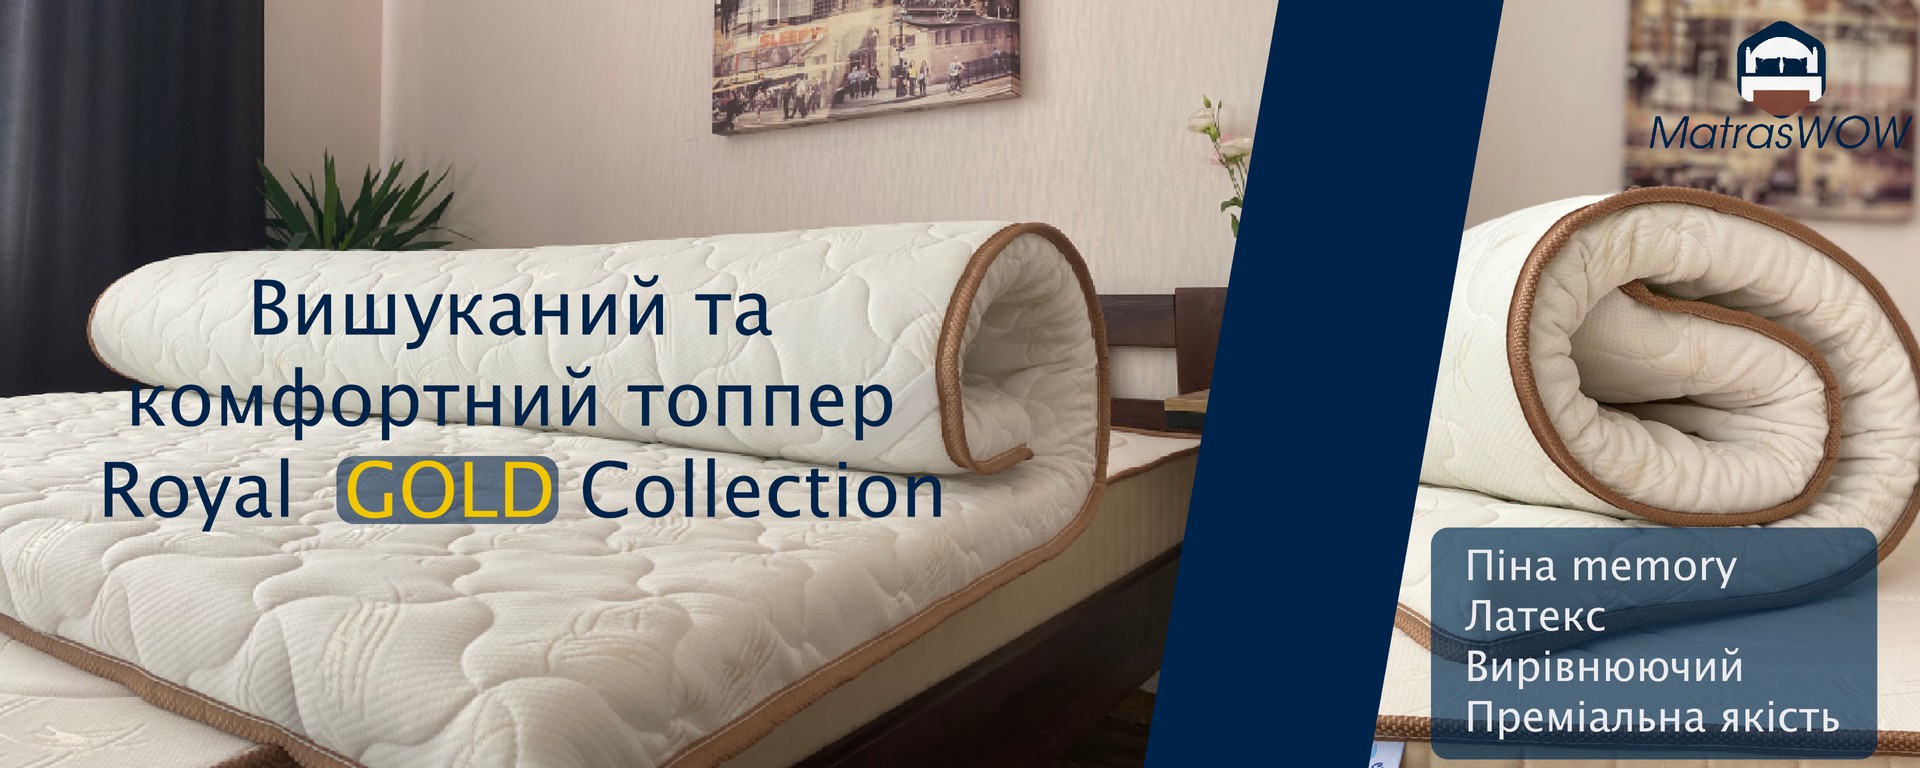 Топпер Royal Gold Collection